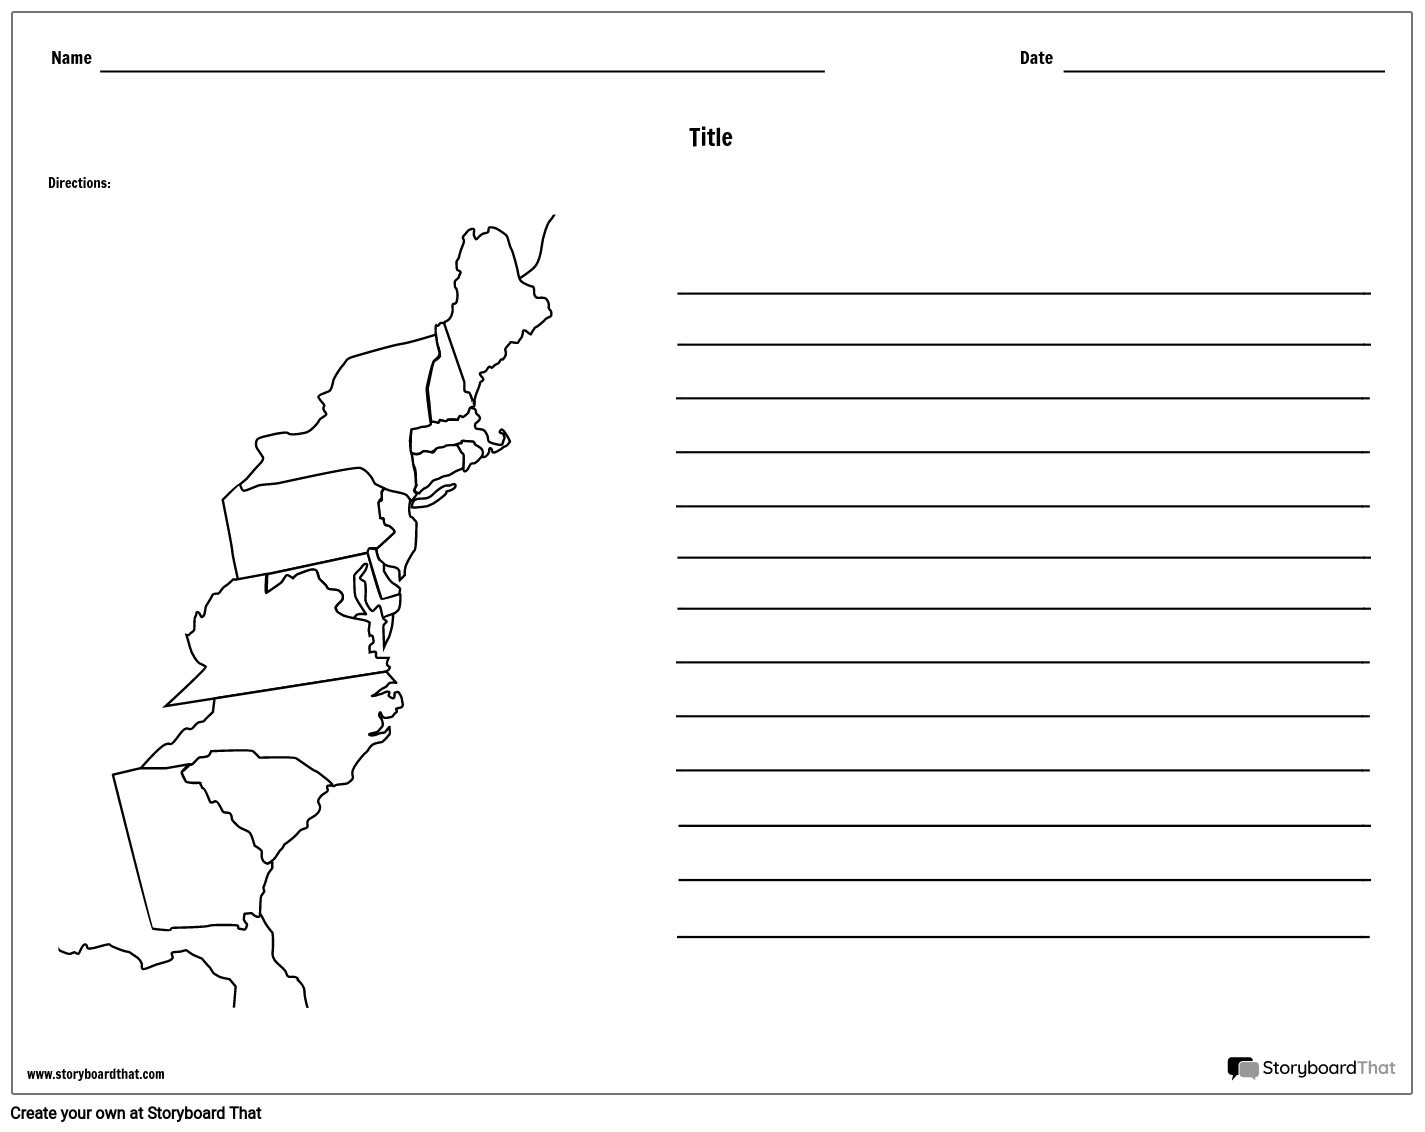 13 Colonies Map - With Lines